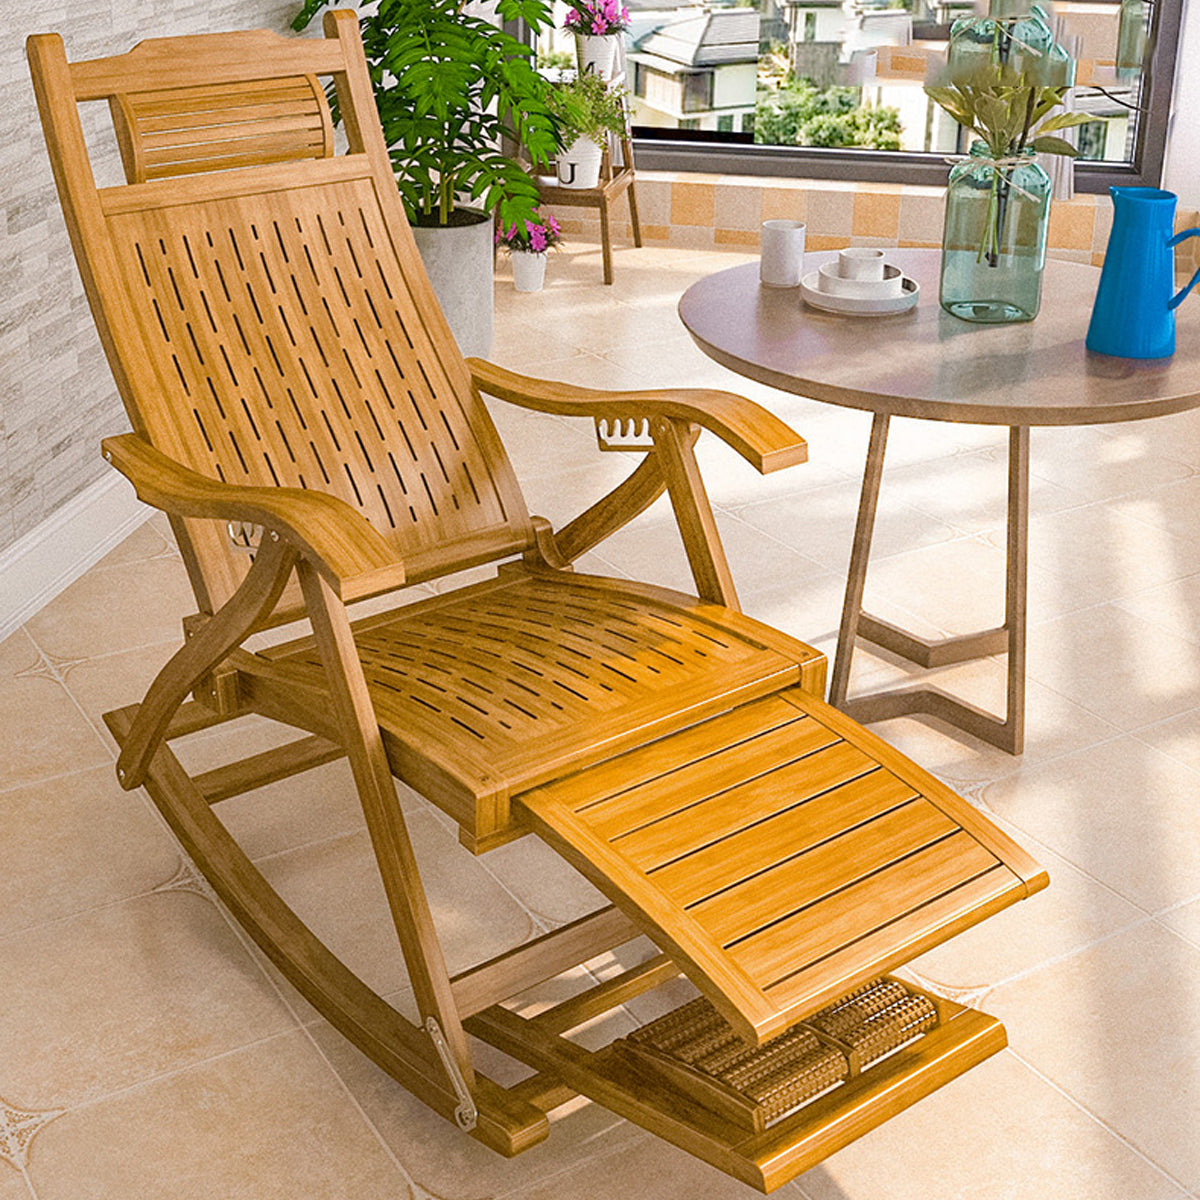 Relax Bamboo Wooden Rocking Chair With Strong Back-Support Chair urbancart.in